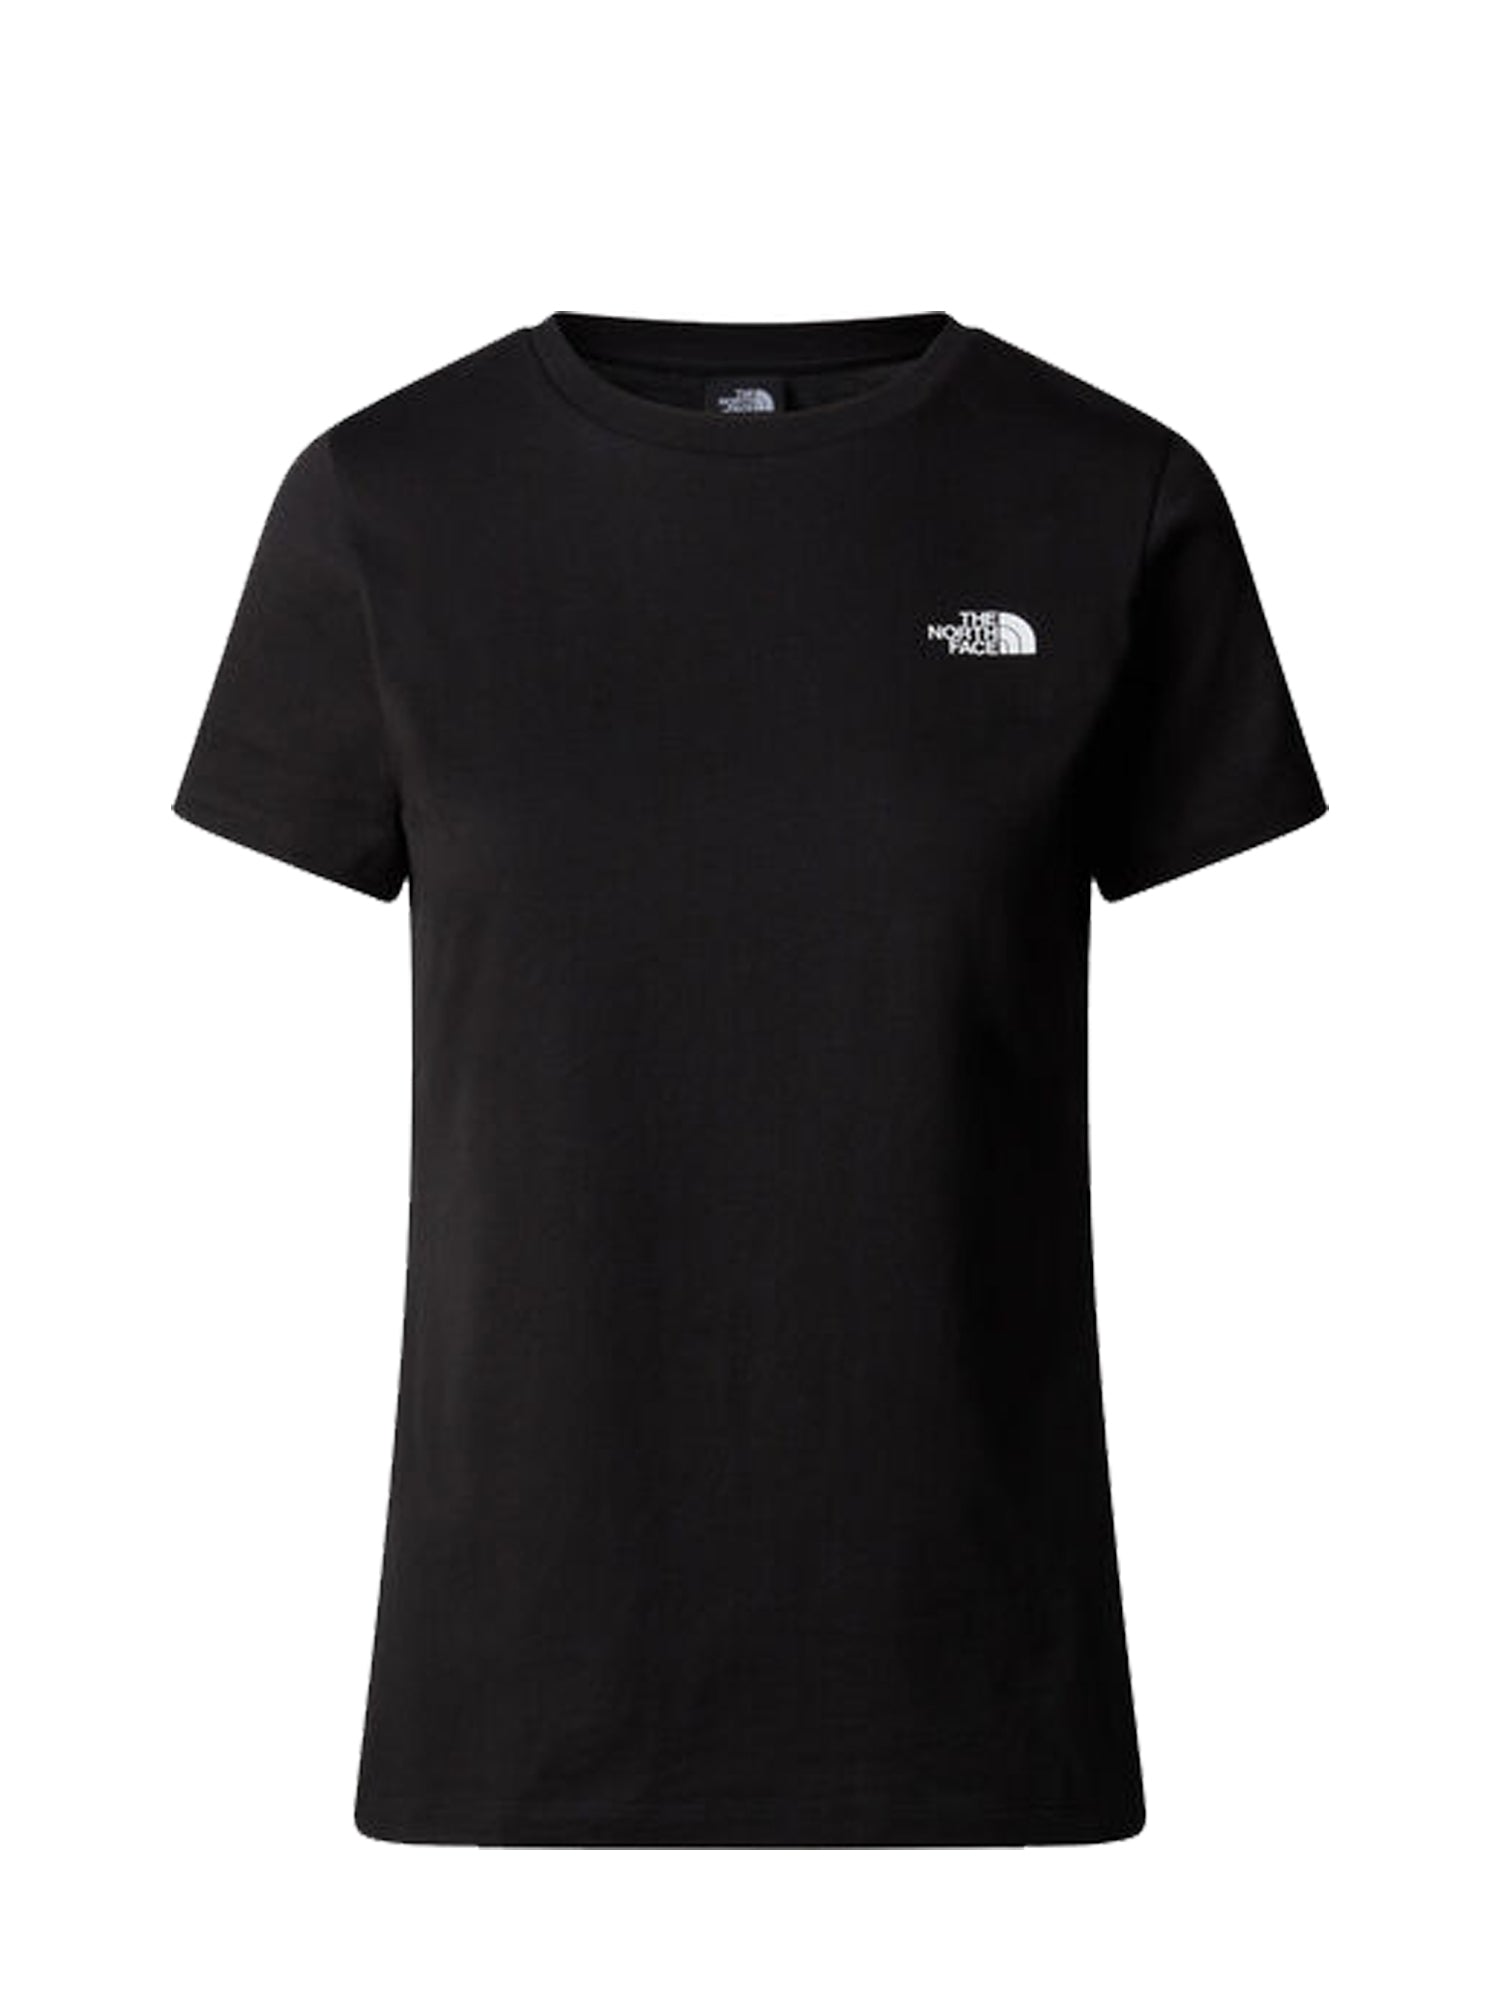 THE NORTH FACE T-SHIRT SLIM SIMPLE DOME NERO